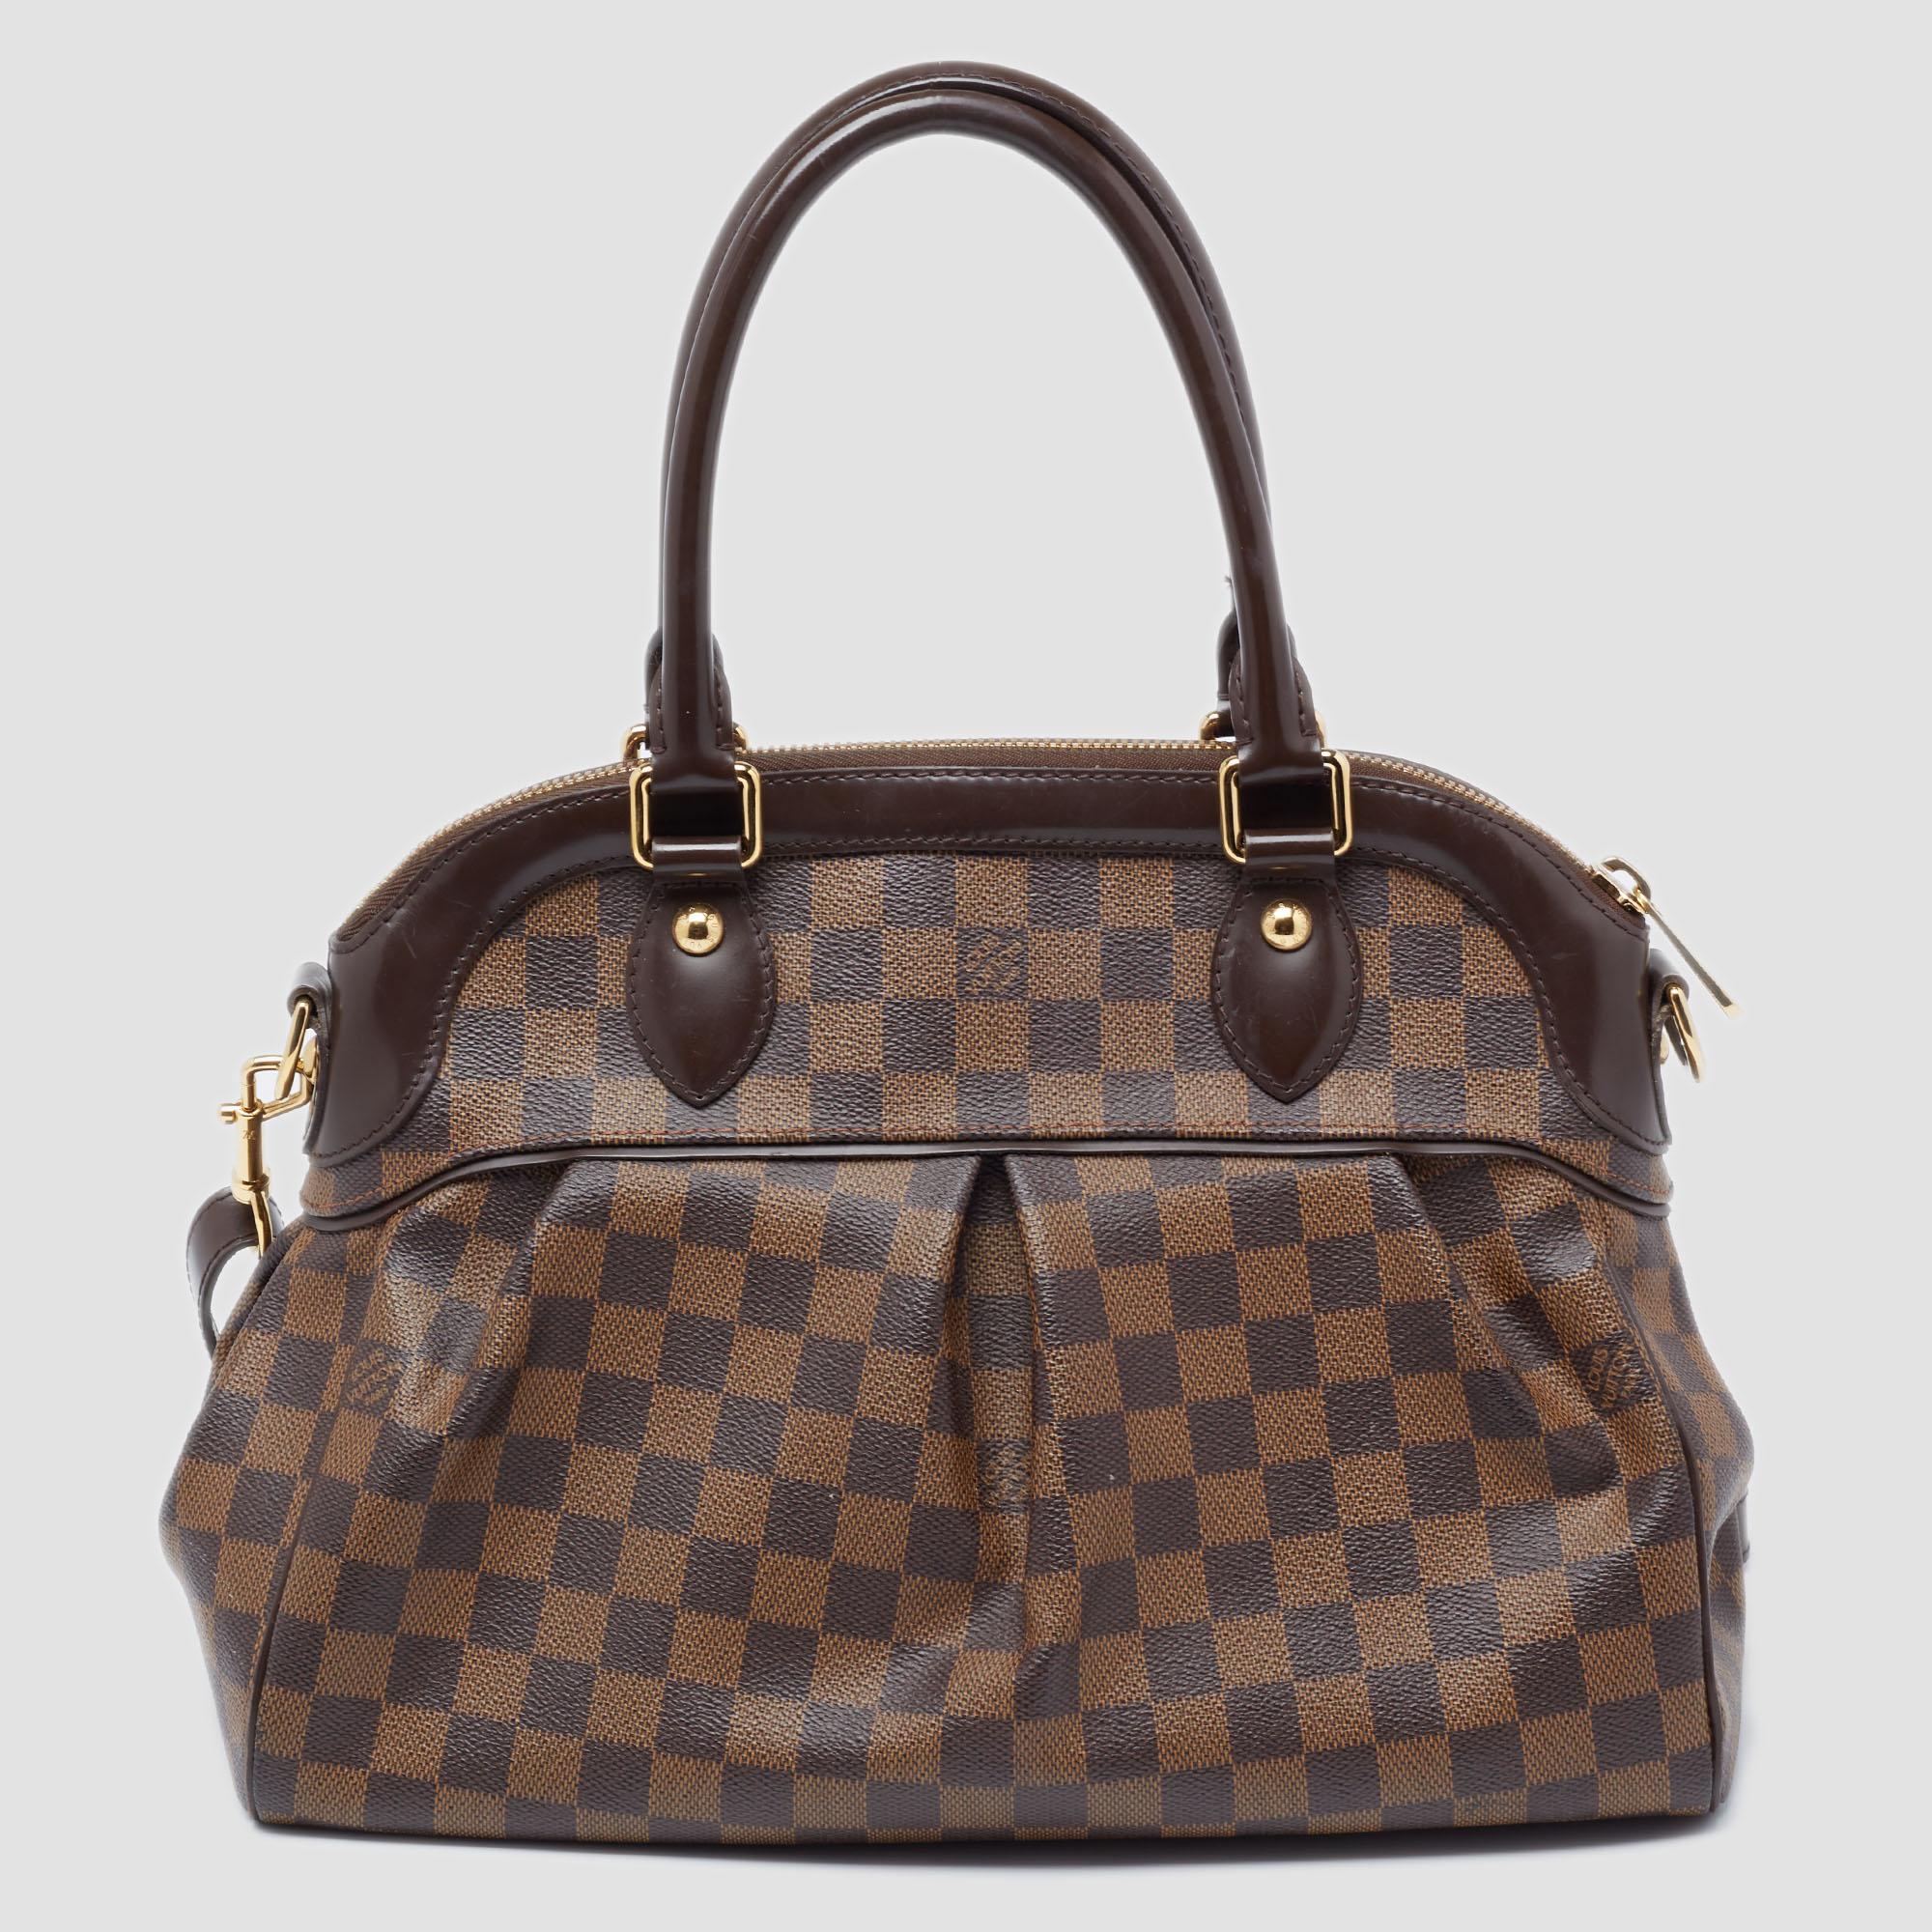 This pre-owned Trevi bag by Louis Vuitton has been crafted from Damier Ebene coated canvas and it features two leather handles and an optional bag strap. It has gold-tone hardware, protective metal feet, and a top zip that opens up to a spacious